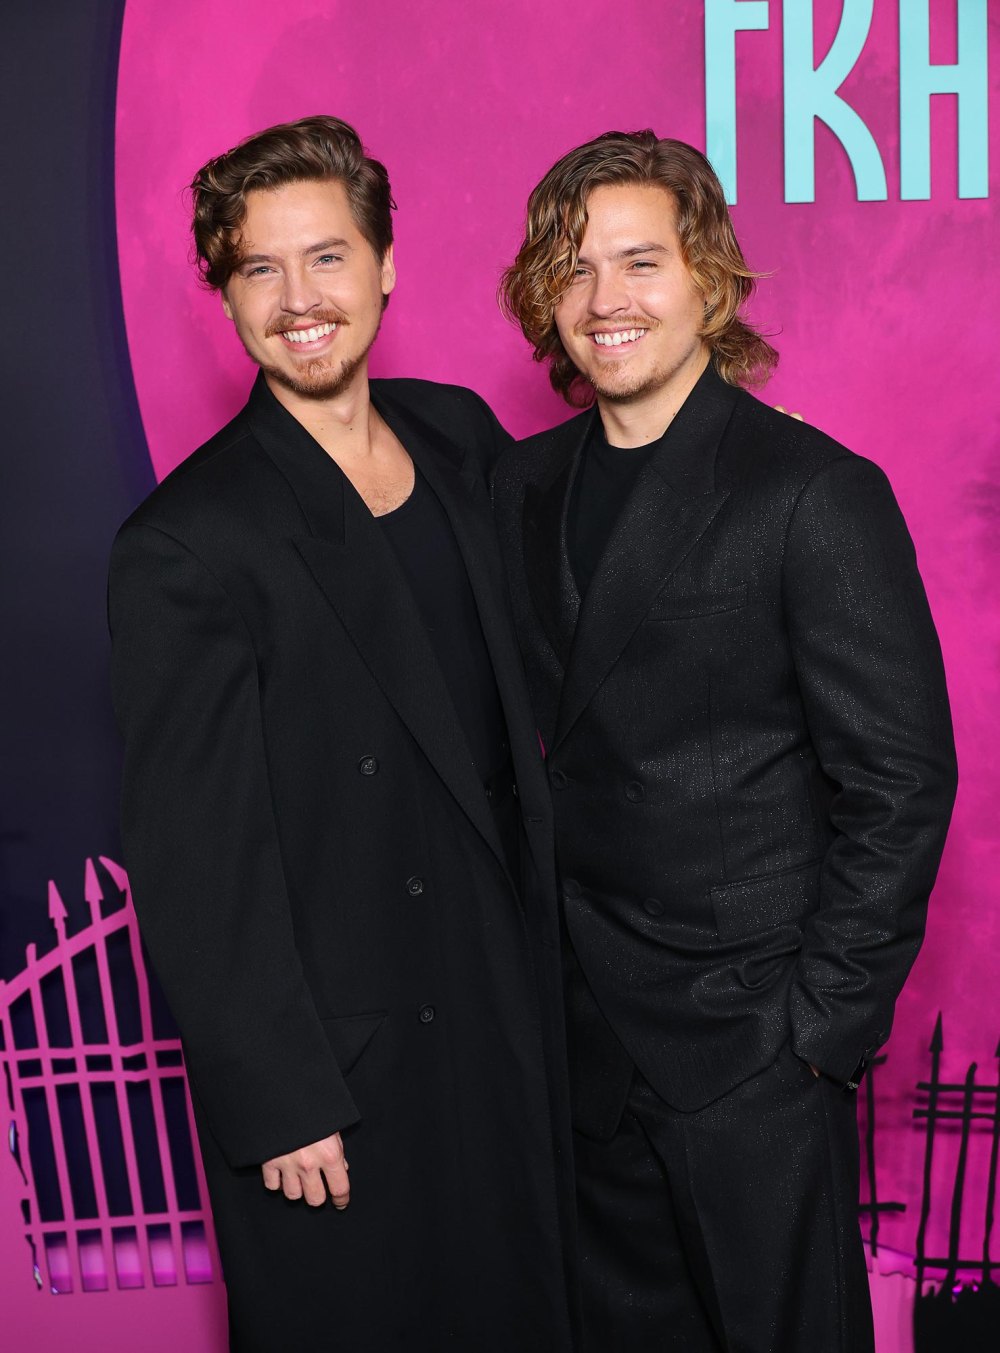 Cole Sprouse Recalls Which Audition With Dylan Sprouse Ended With a Fistfight and Broken Mirror 918